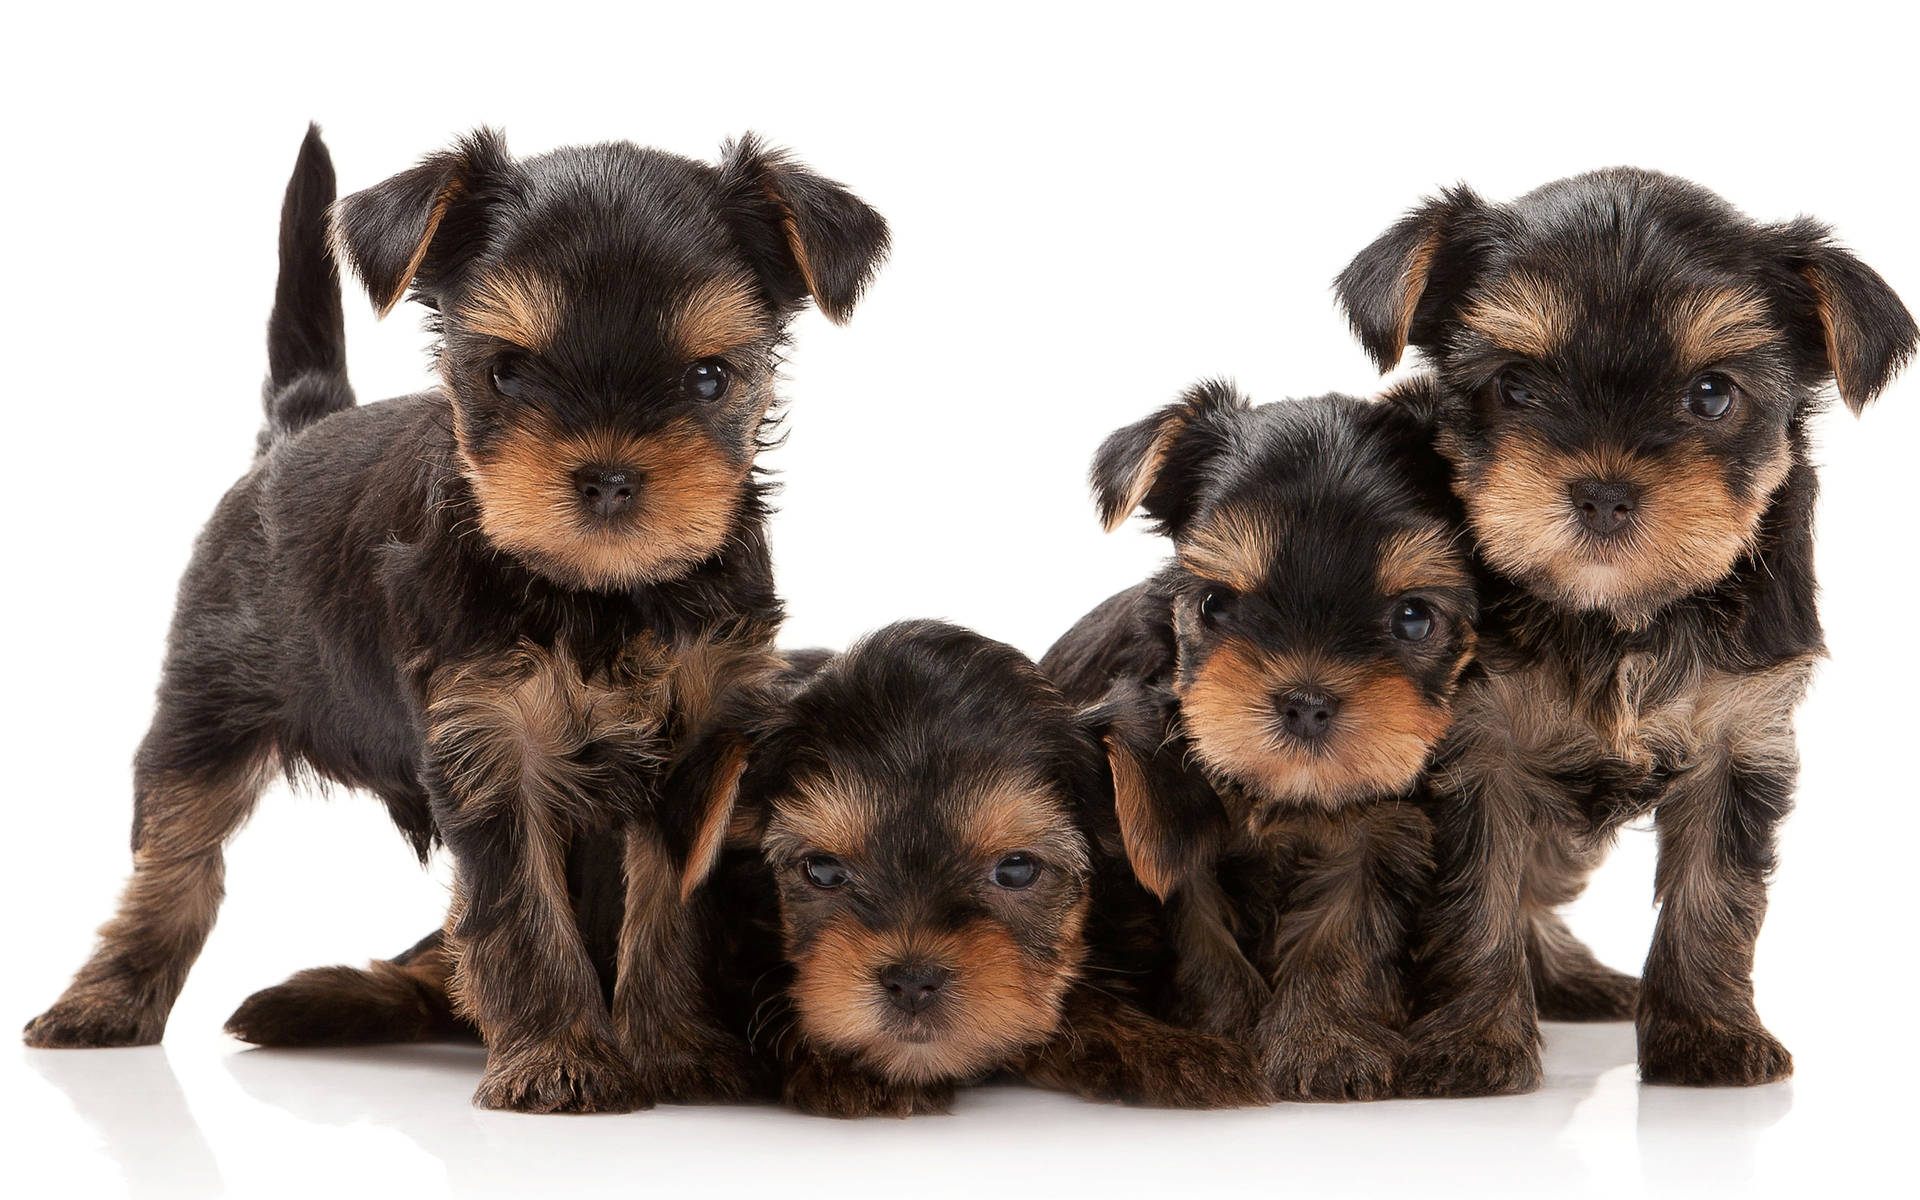 Adorable Family Portrait Of Purebred Yorkie Puppies Background